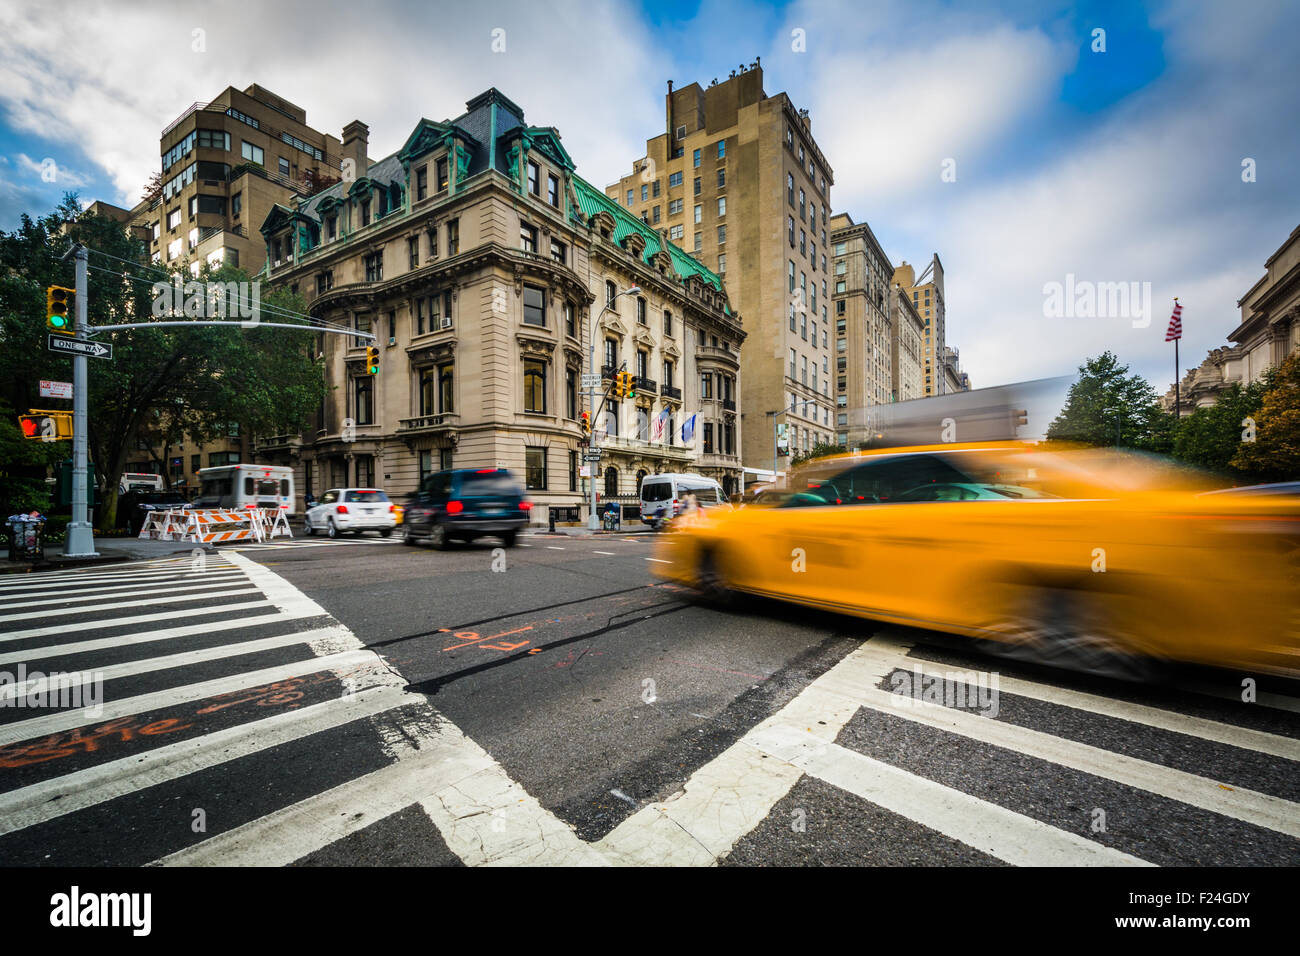 Intersection of 5th Avenue and 84th Street in the Upper East Side, Manhattan, New York. Stock Photo